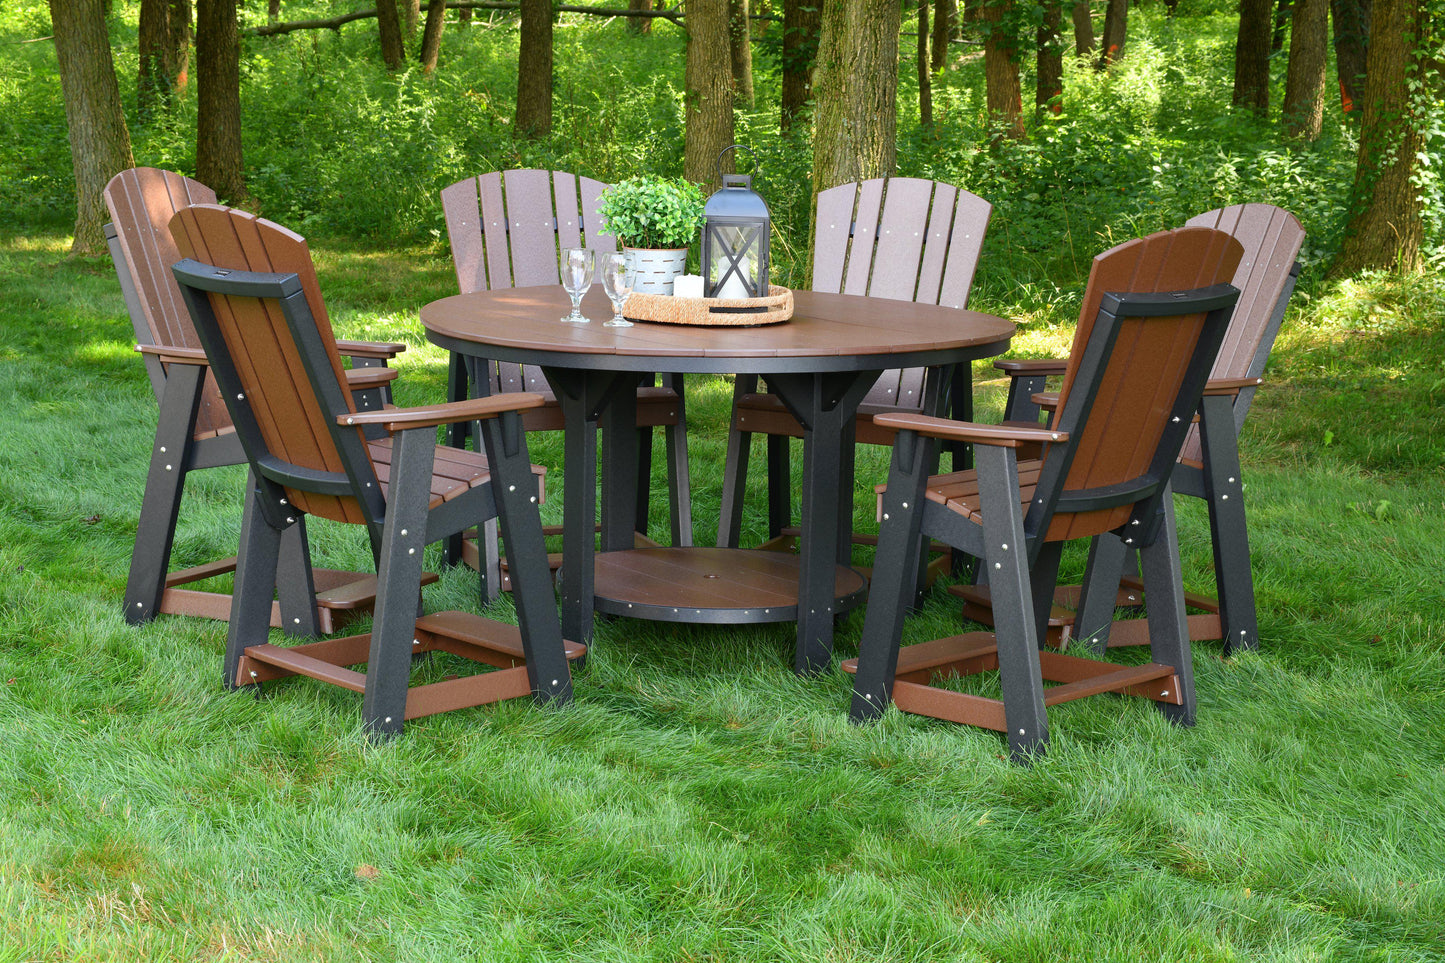 Wildridge Heritage Recycled Plastic Outdoor 60" Pub Table Set with 6 Balcony Chairs - LEAD TIME TO SHIP 6 WEEKS OR LESS